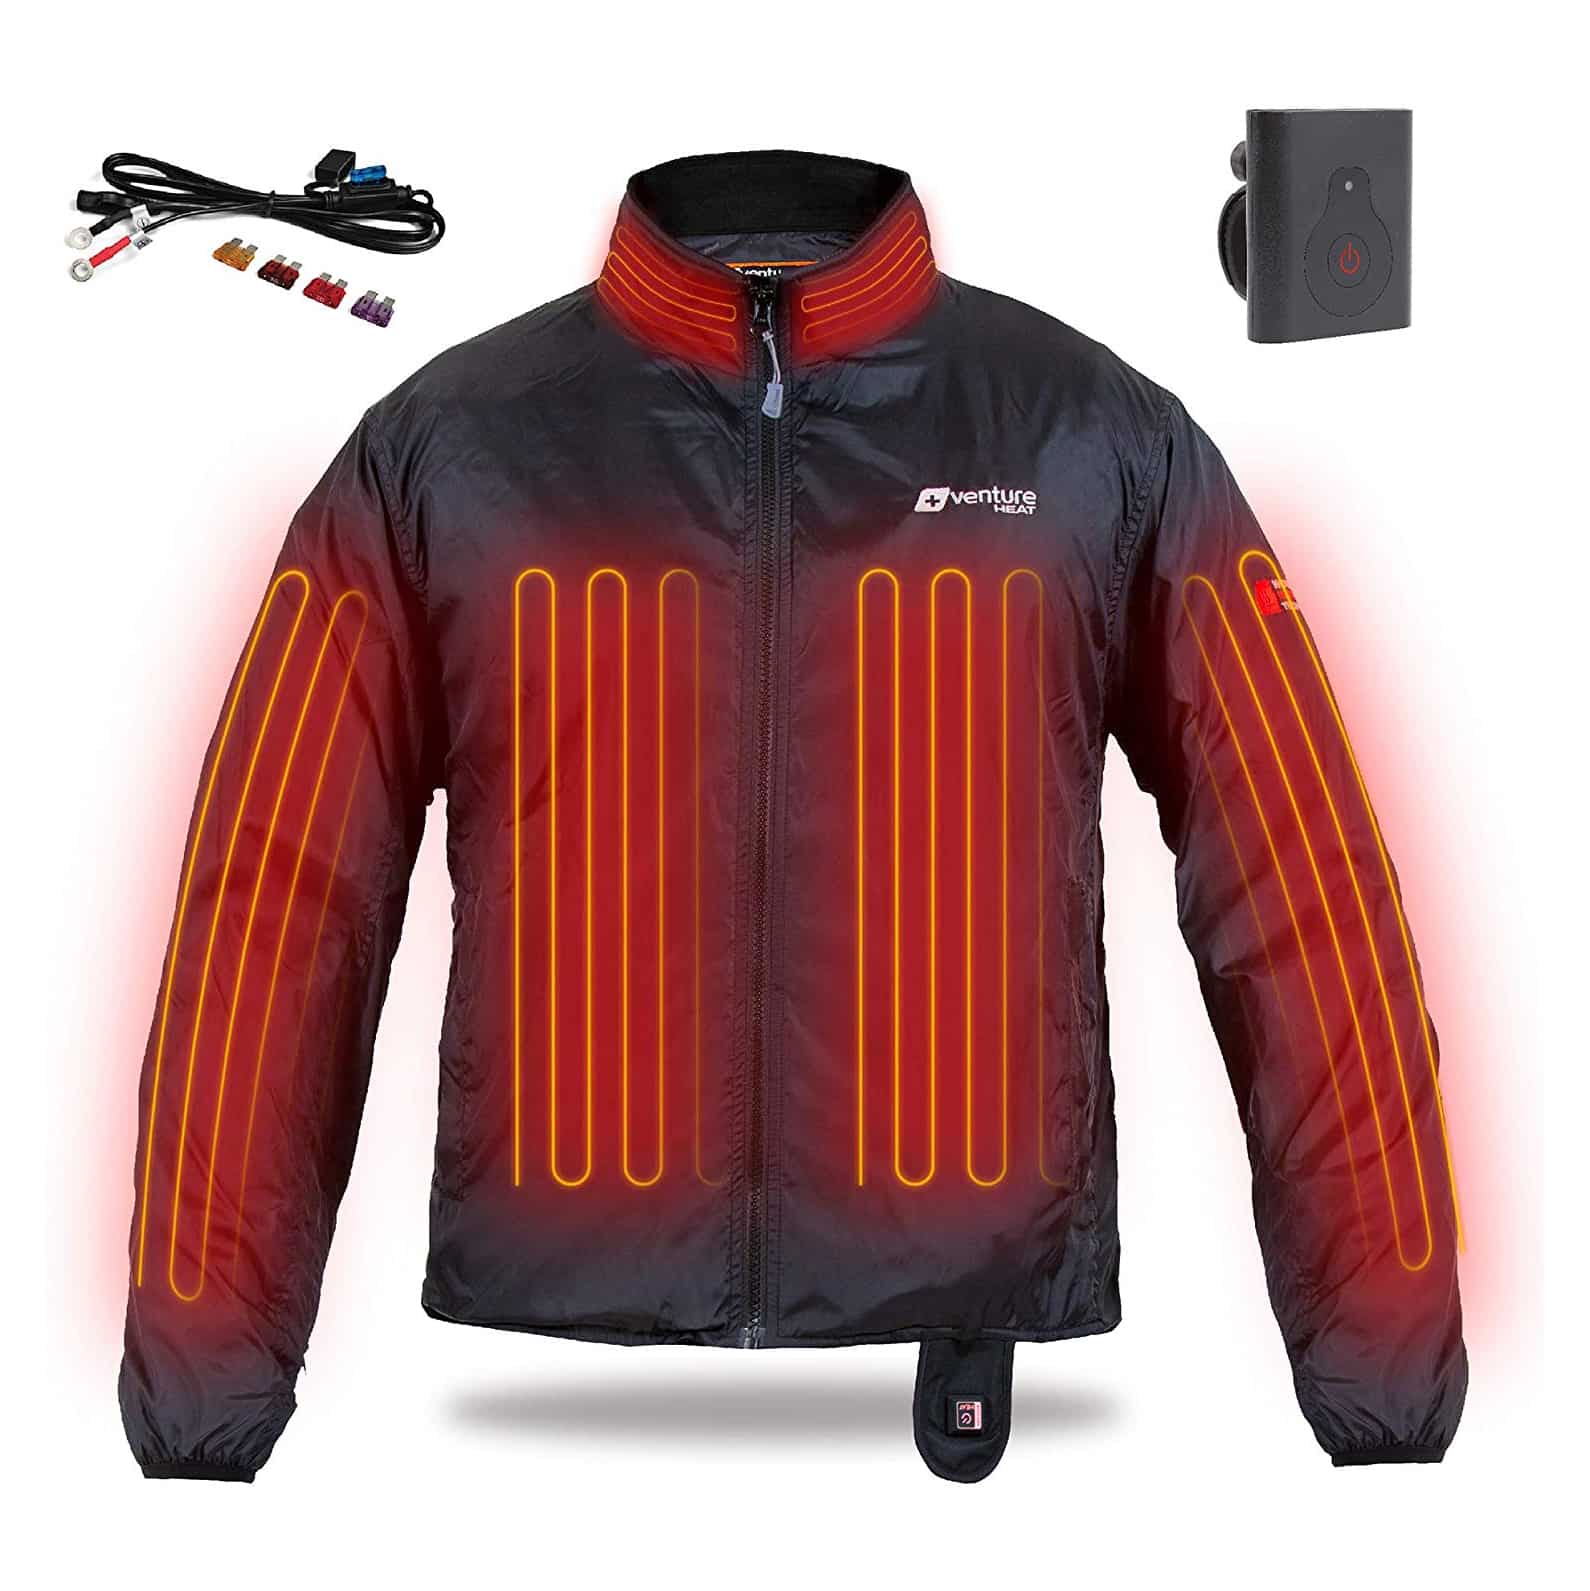 Heated Jacket for Men: Stay Warm and Inspired with Cutting-Edge Technology